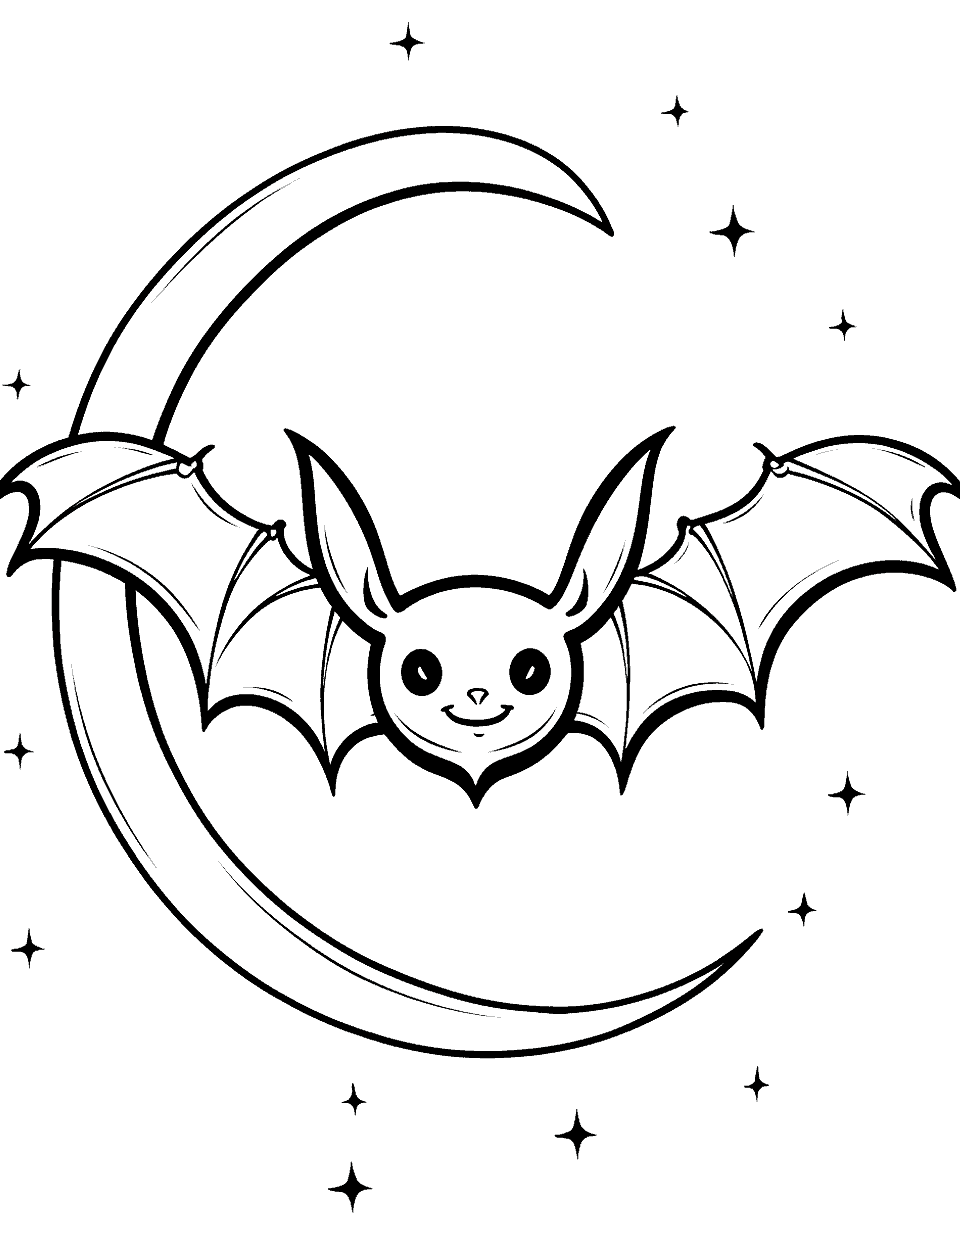 Bat and a Crescent Moon Coloring Page - A bat flying in front of a crescent moon.